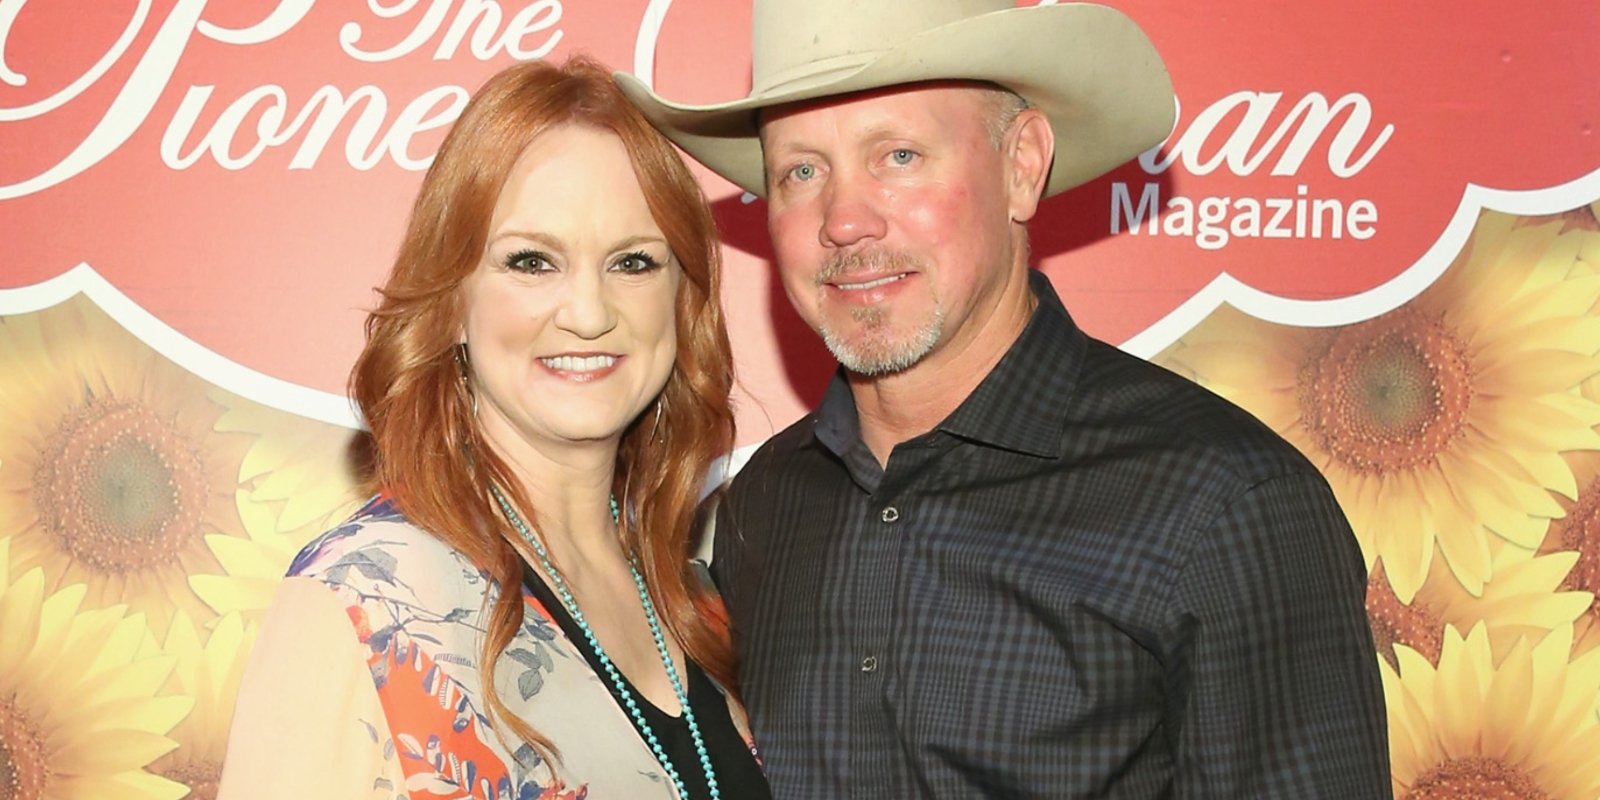 Some Ree Drummond Fans Claim ‘Smoking Hot’ Ladd Is the Real Reason They Watch ‘The Pioneer Woman’